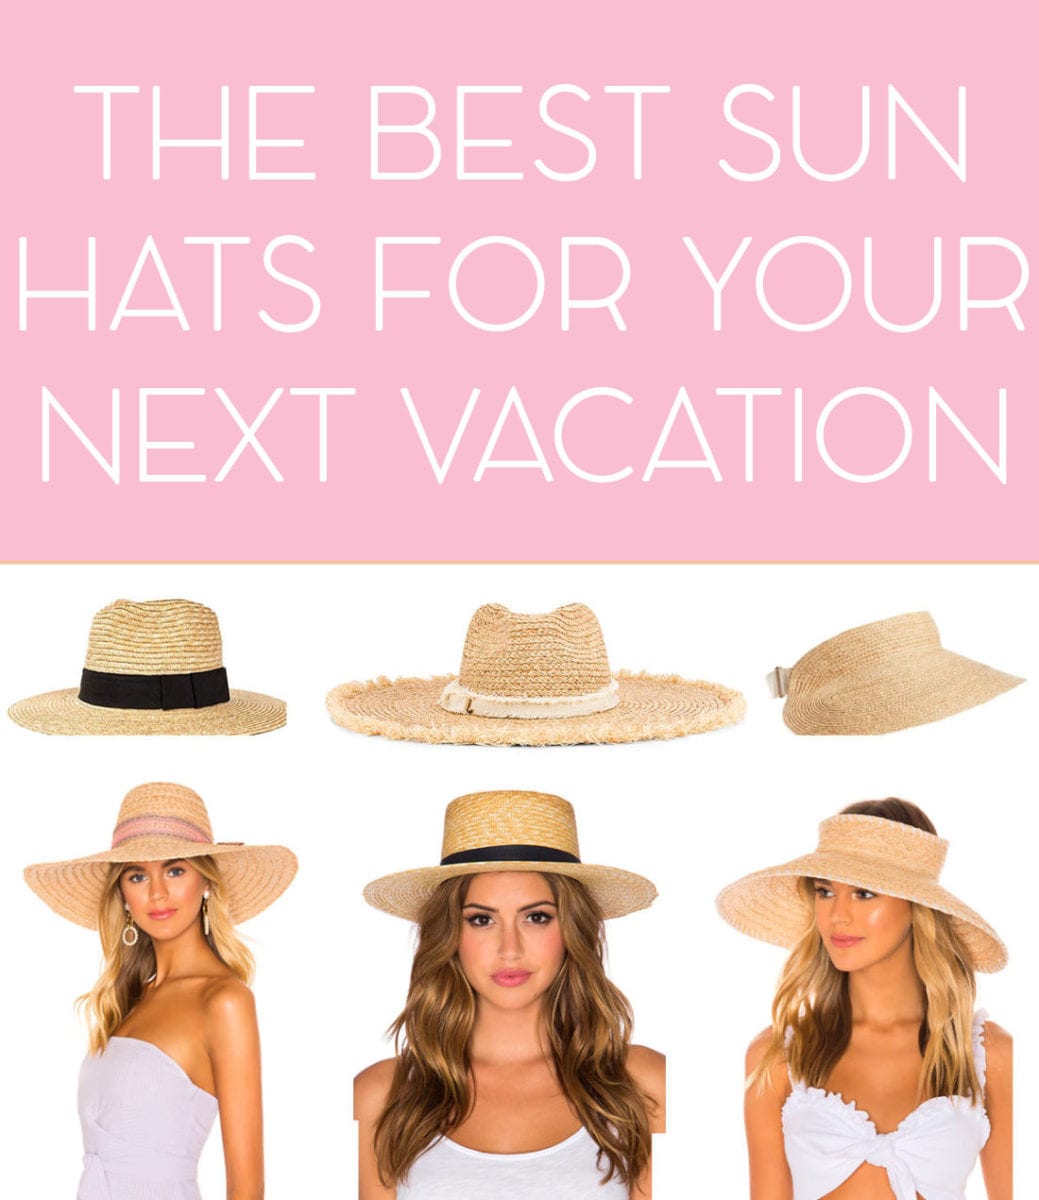 The Best Sun Hats for Vacation - the best floppy hats for the beach,  fedoras, bucket hats, sun visors and more - JetsetChristina